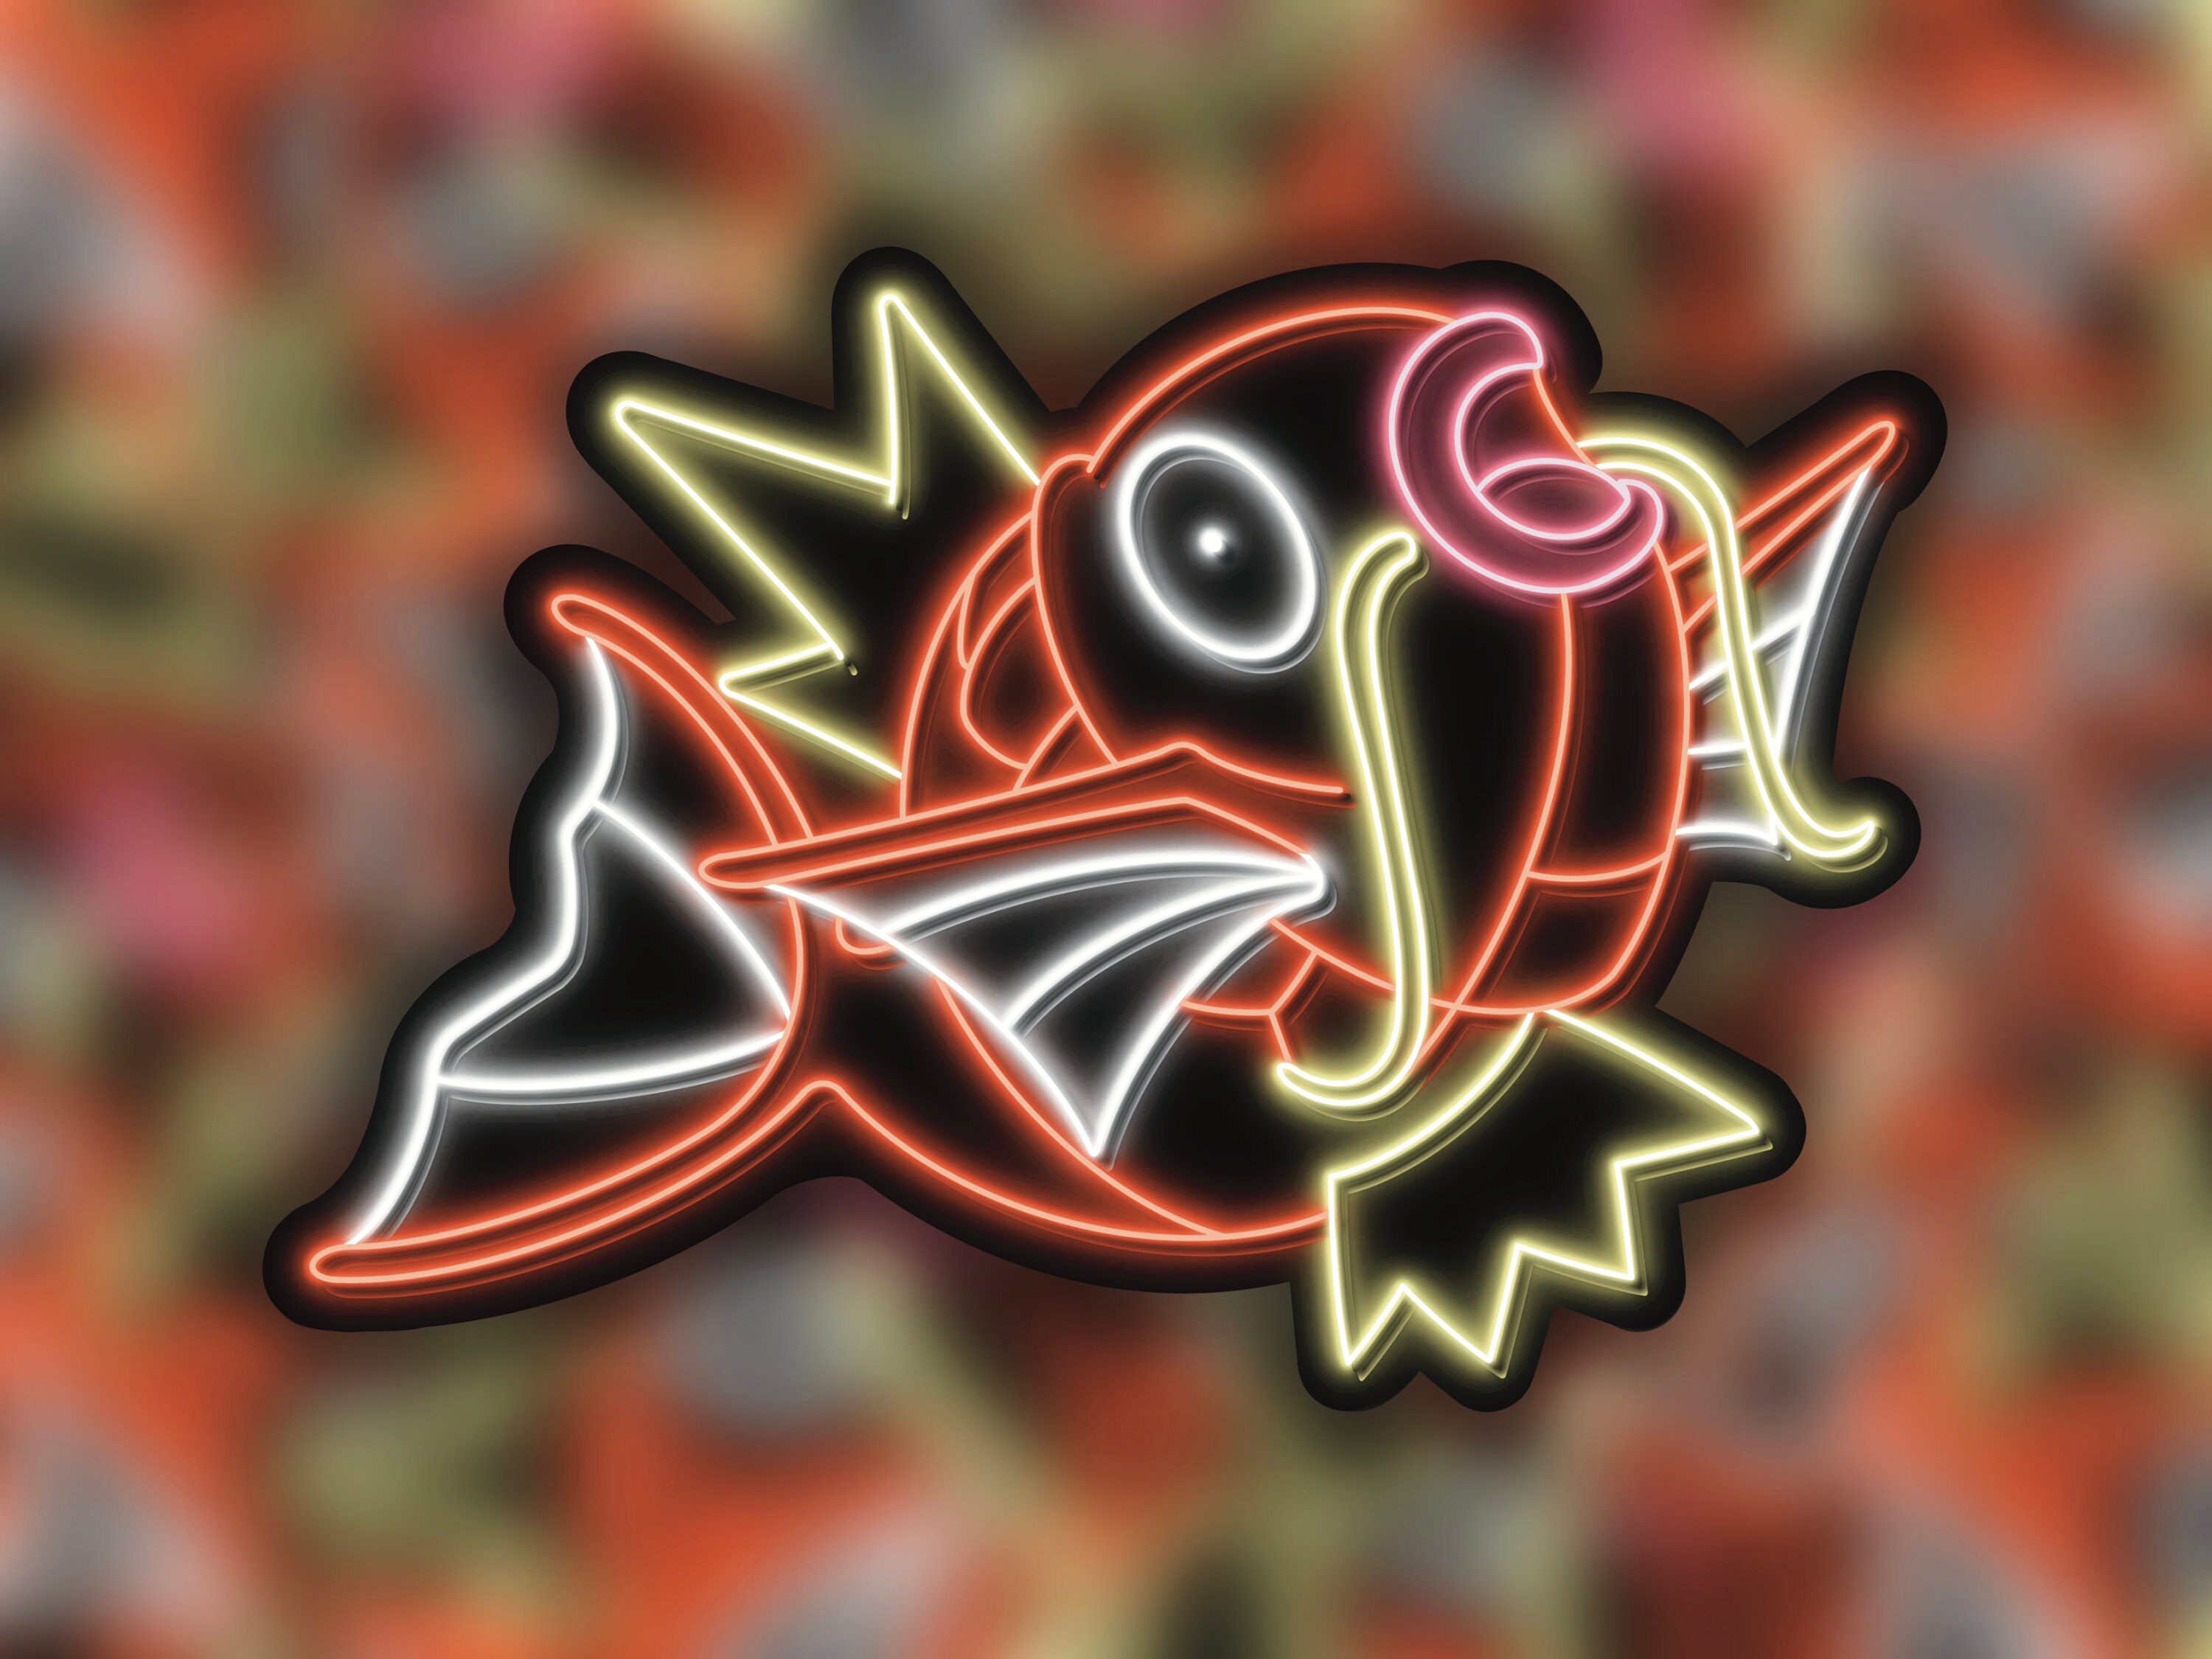 Pokemon GO Players Are Fighting Gym Raids Against Magikarp, Of All Monsters